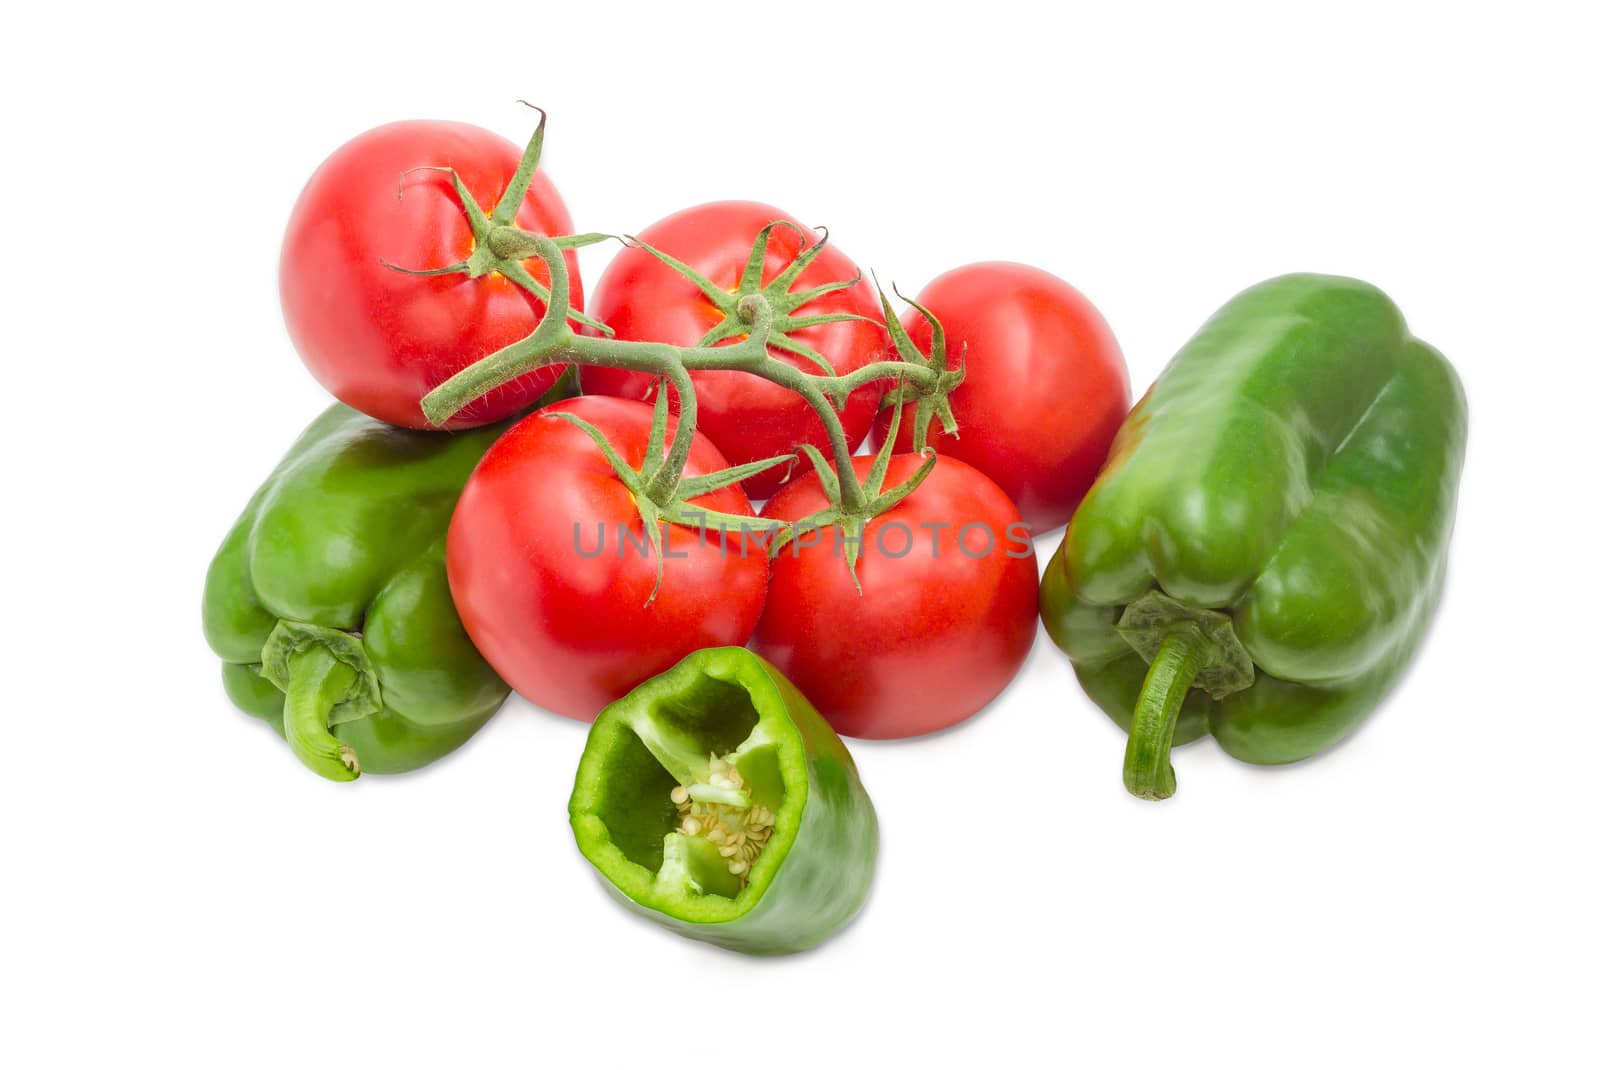 Branch with several ripe red tomatoes, two whole and one half of the green bell peppers closeup on a light background
